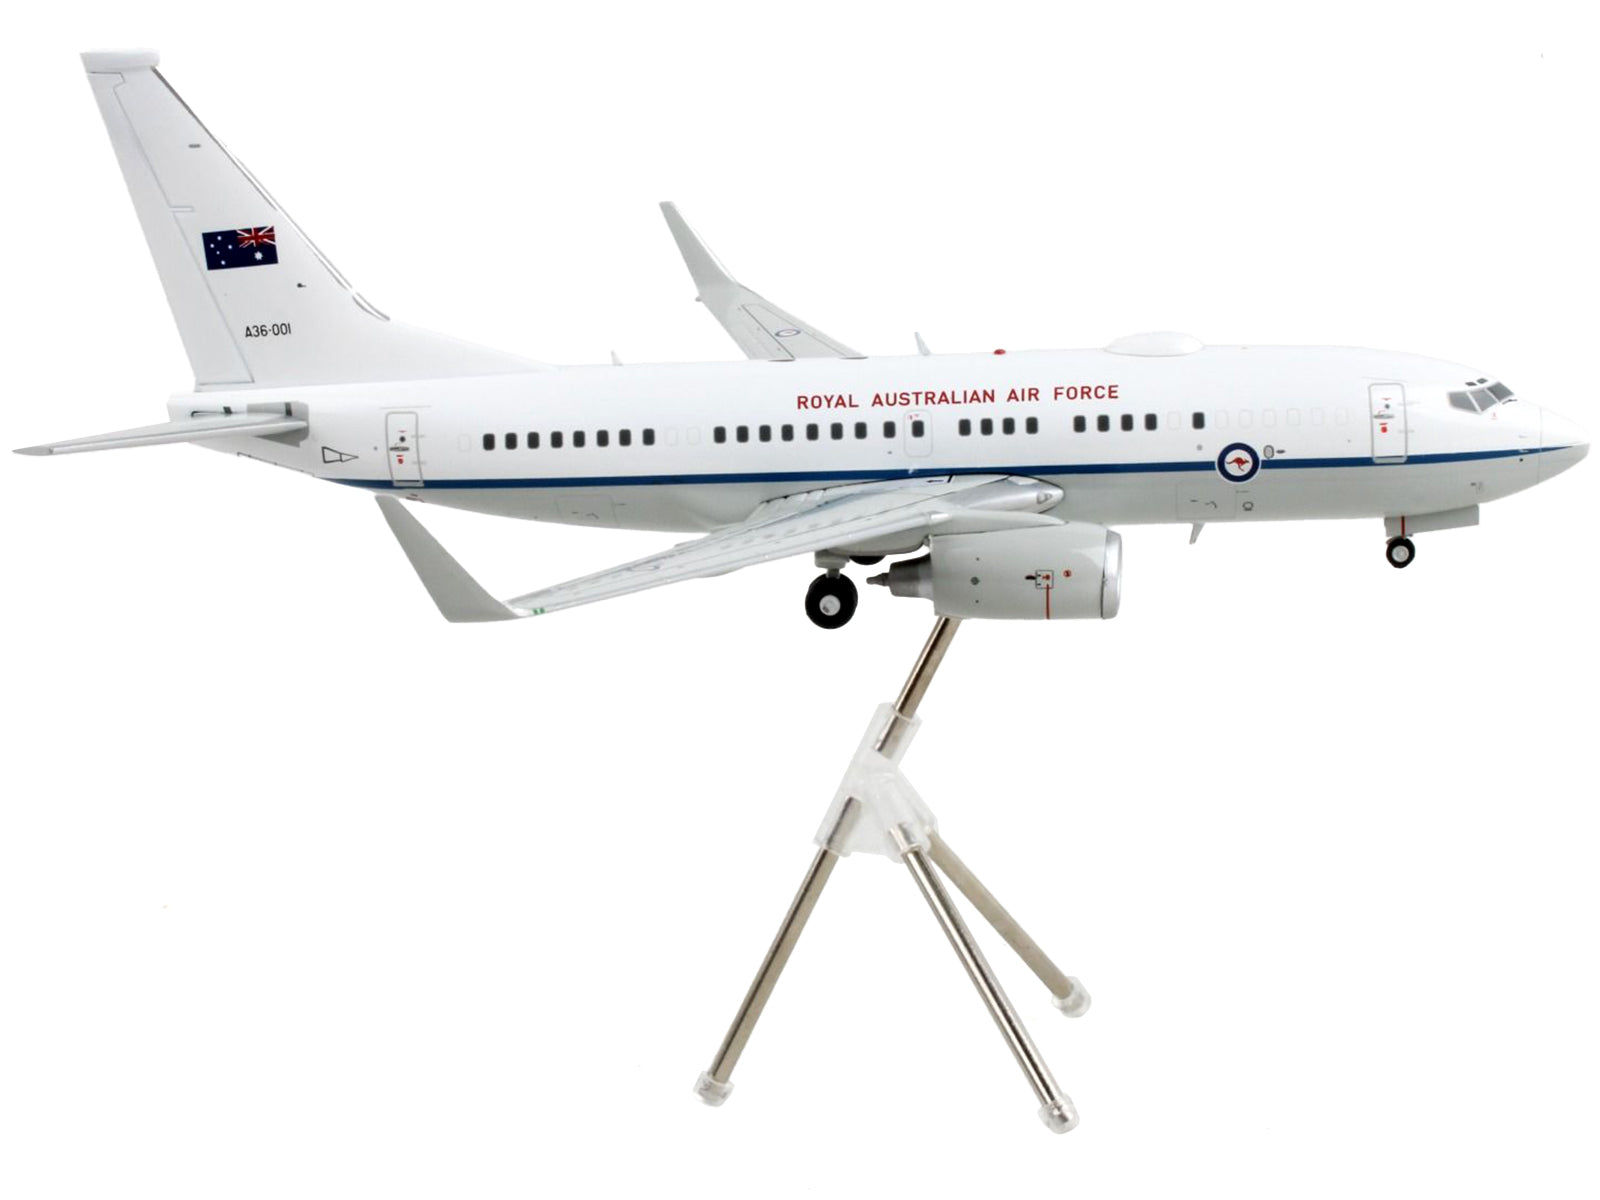 Boeing 737-700 Transport Aircraft "Royal Australian Air Force - A36-001" White and Gray "Gemini 200" Series 1/200 Diecast Model Airplane by GeminiJets